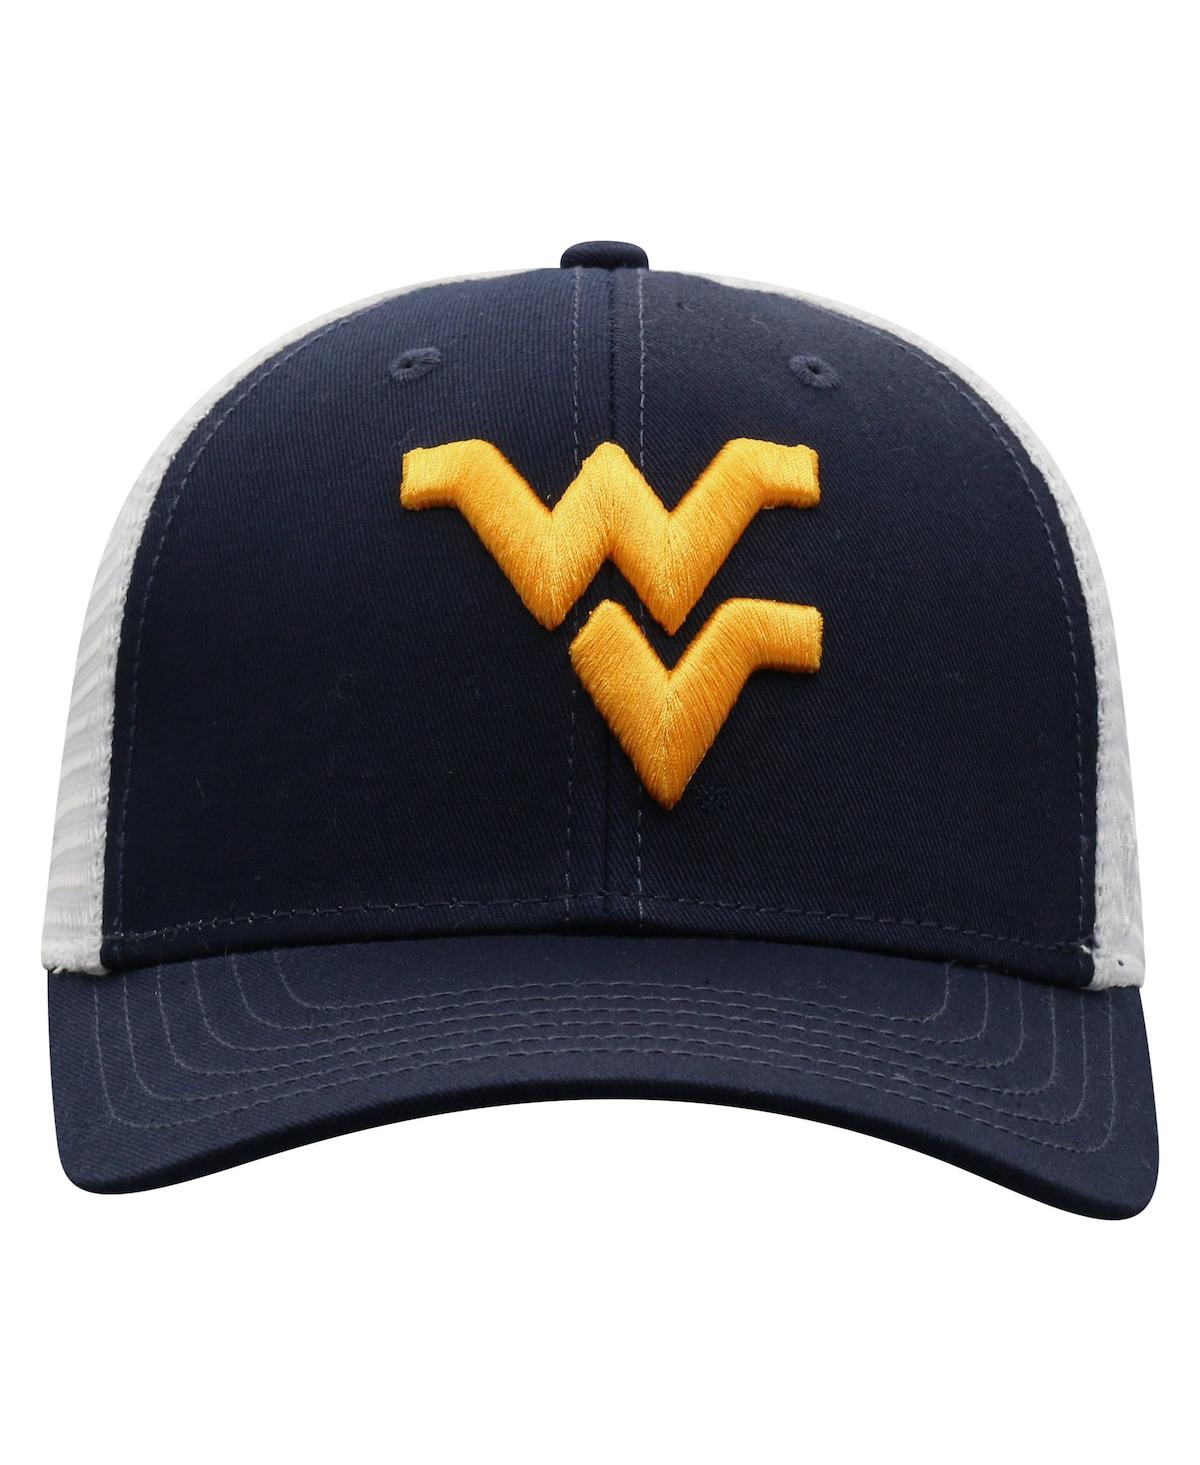 Shop Top Of The World Men's  Navy, White West Virginia Mountaineers Trucker Snapback Hat In Navy,white